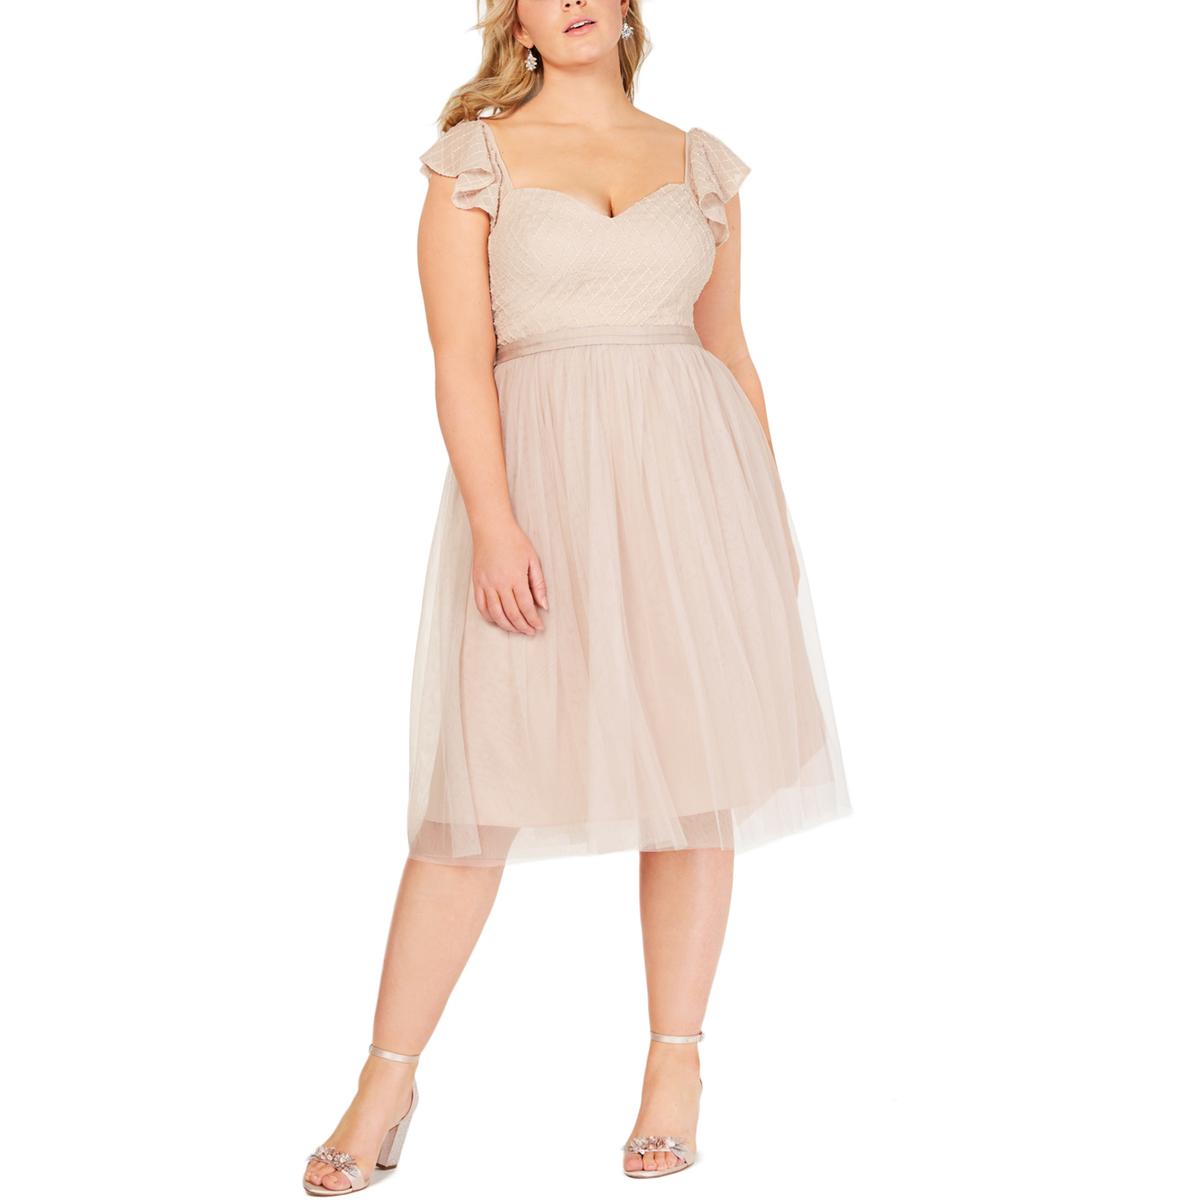 City Chic Womens Pink Fit & Flare Party Cocktail Dress Plus 18 M BHFO ...